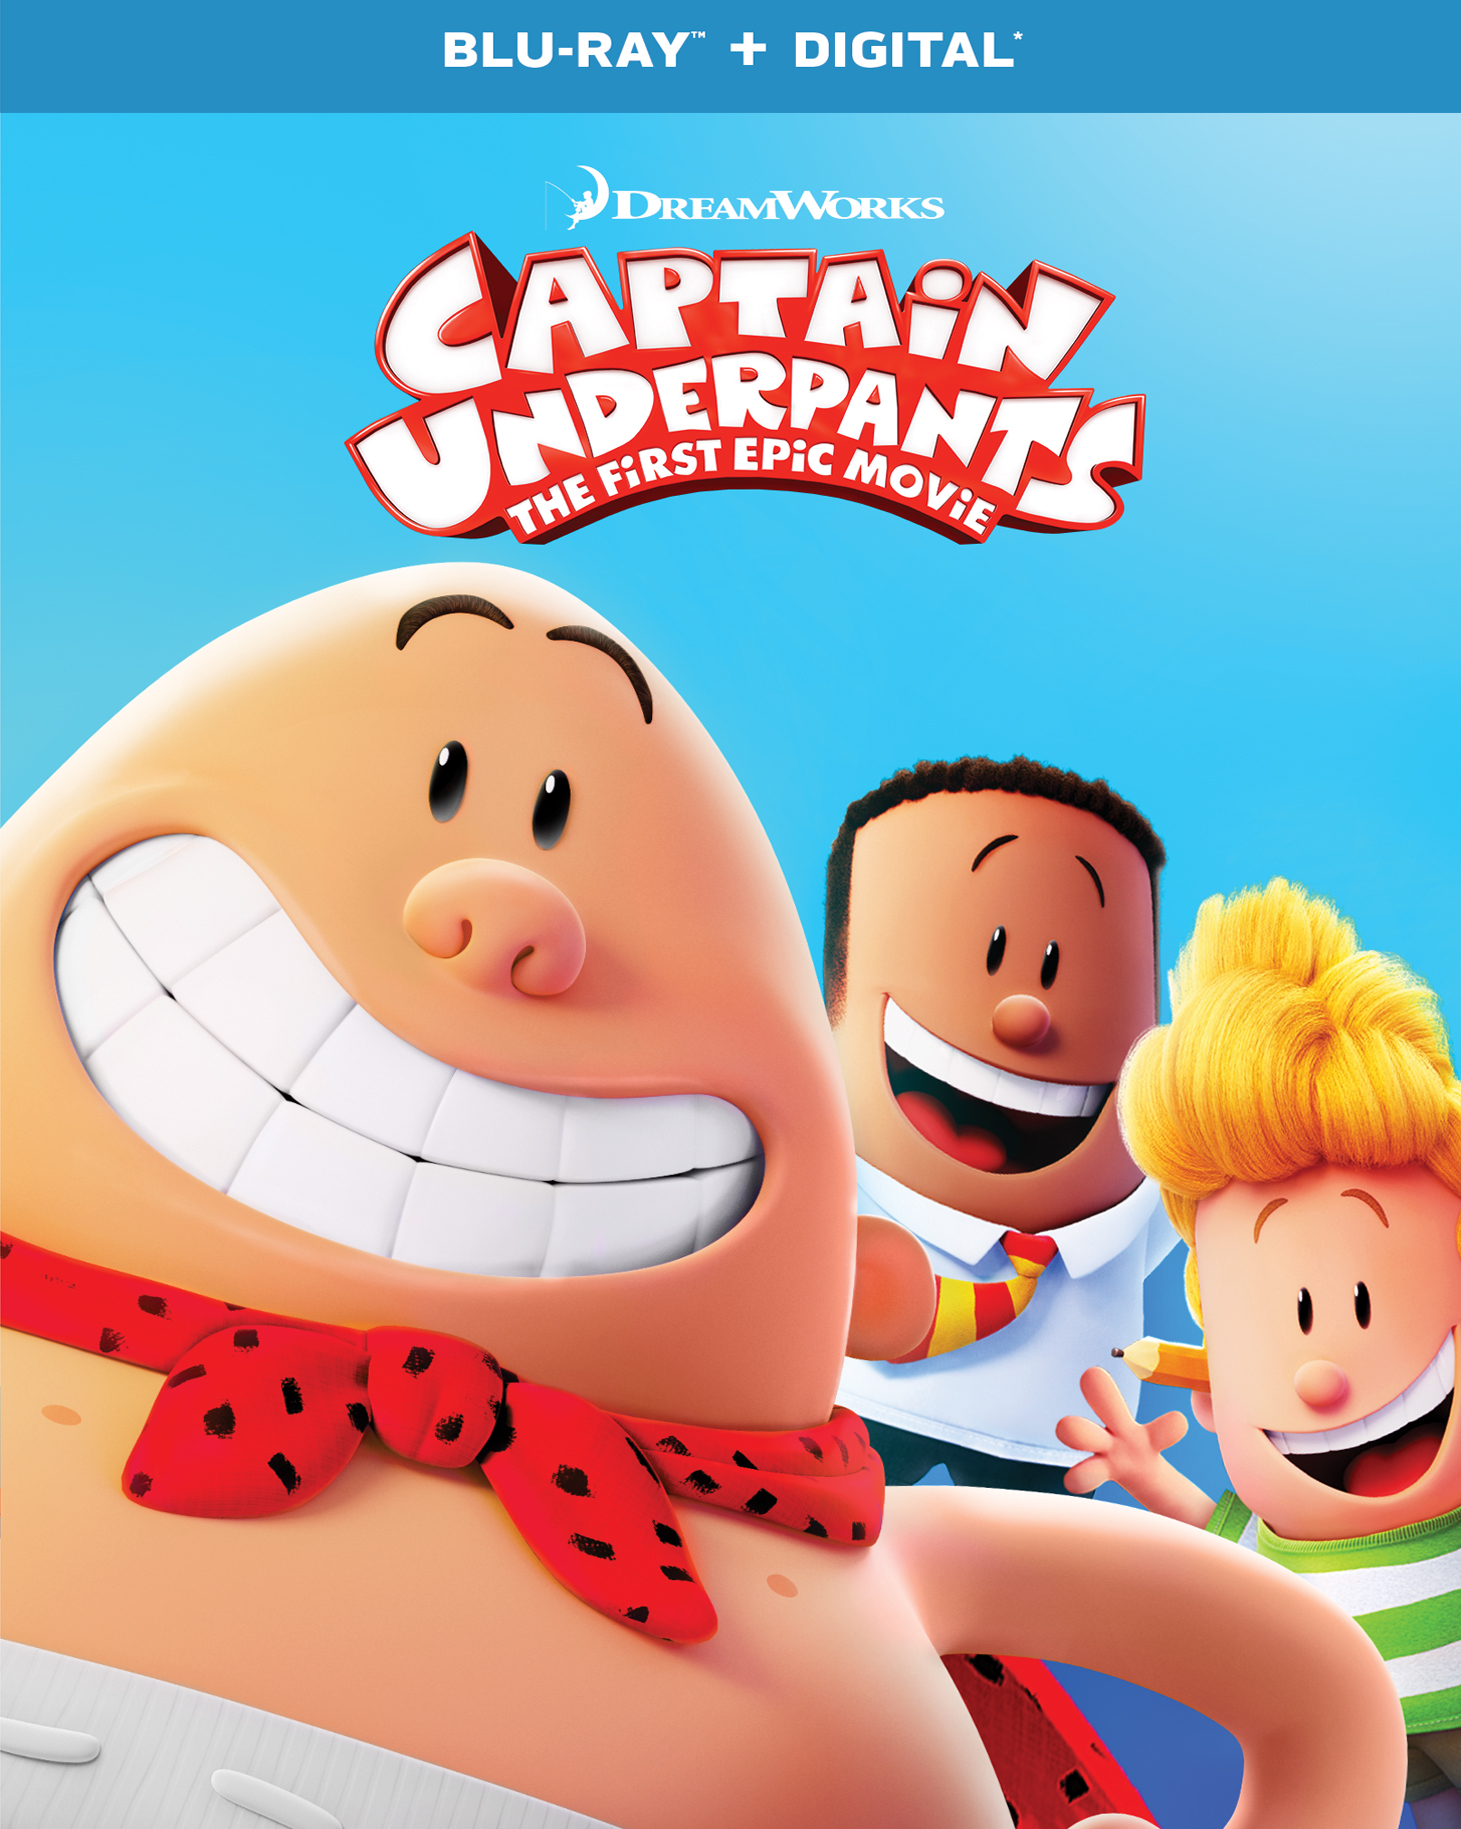 Captain Underpants: The First Epic Movie [Includes Digital Copy] [Blu-ray]  [2017] - Best Buy